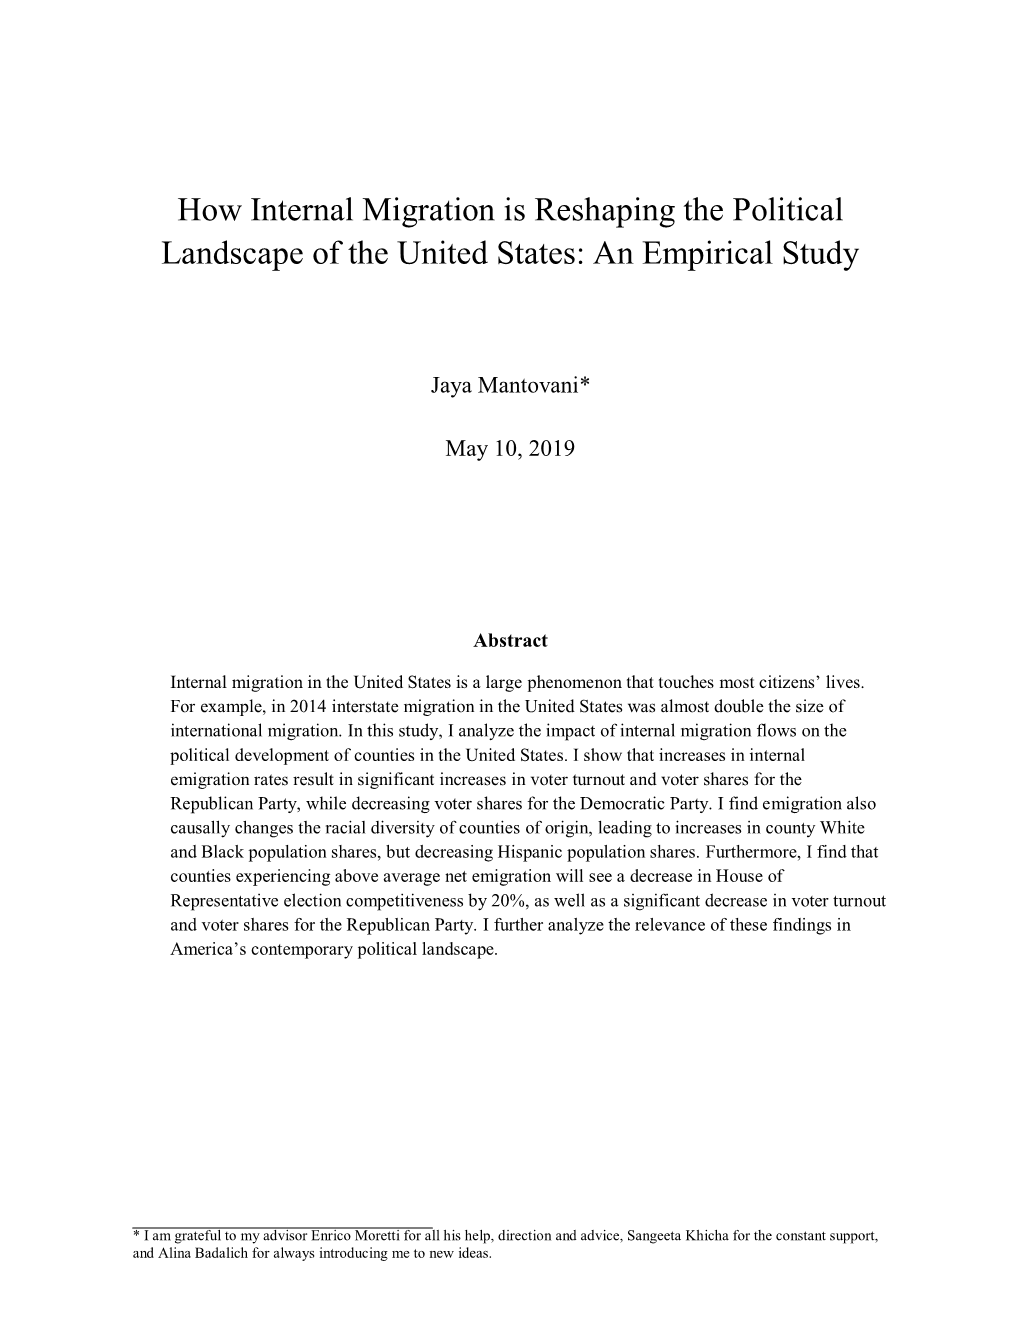 How Internal Migration Is Reshaping the Political Landscape of the United States: an Empirical Study